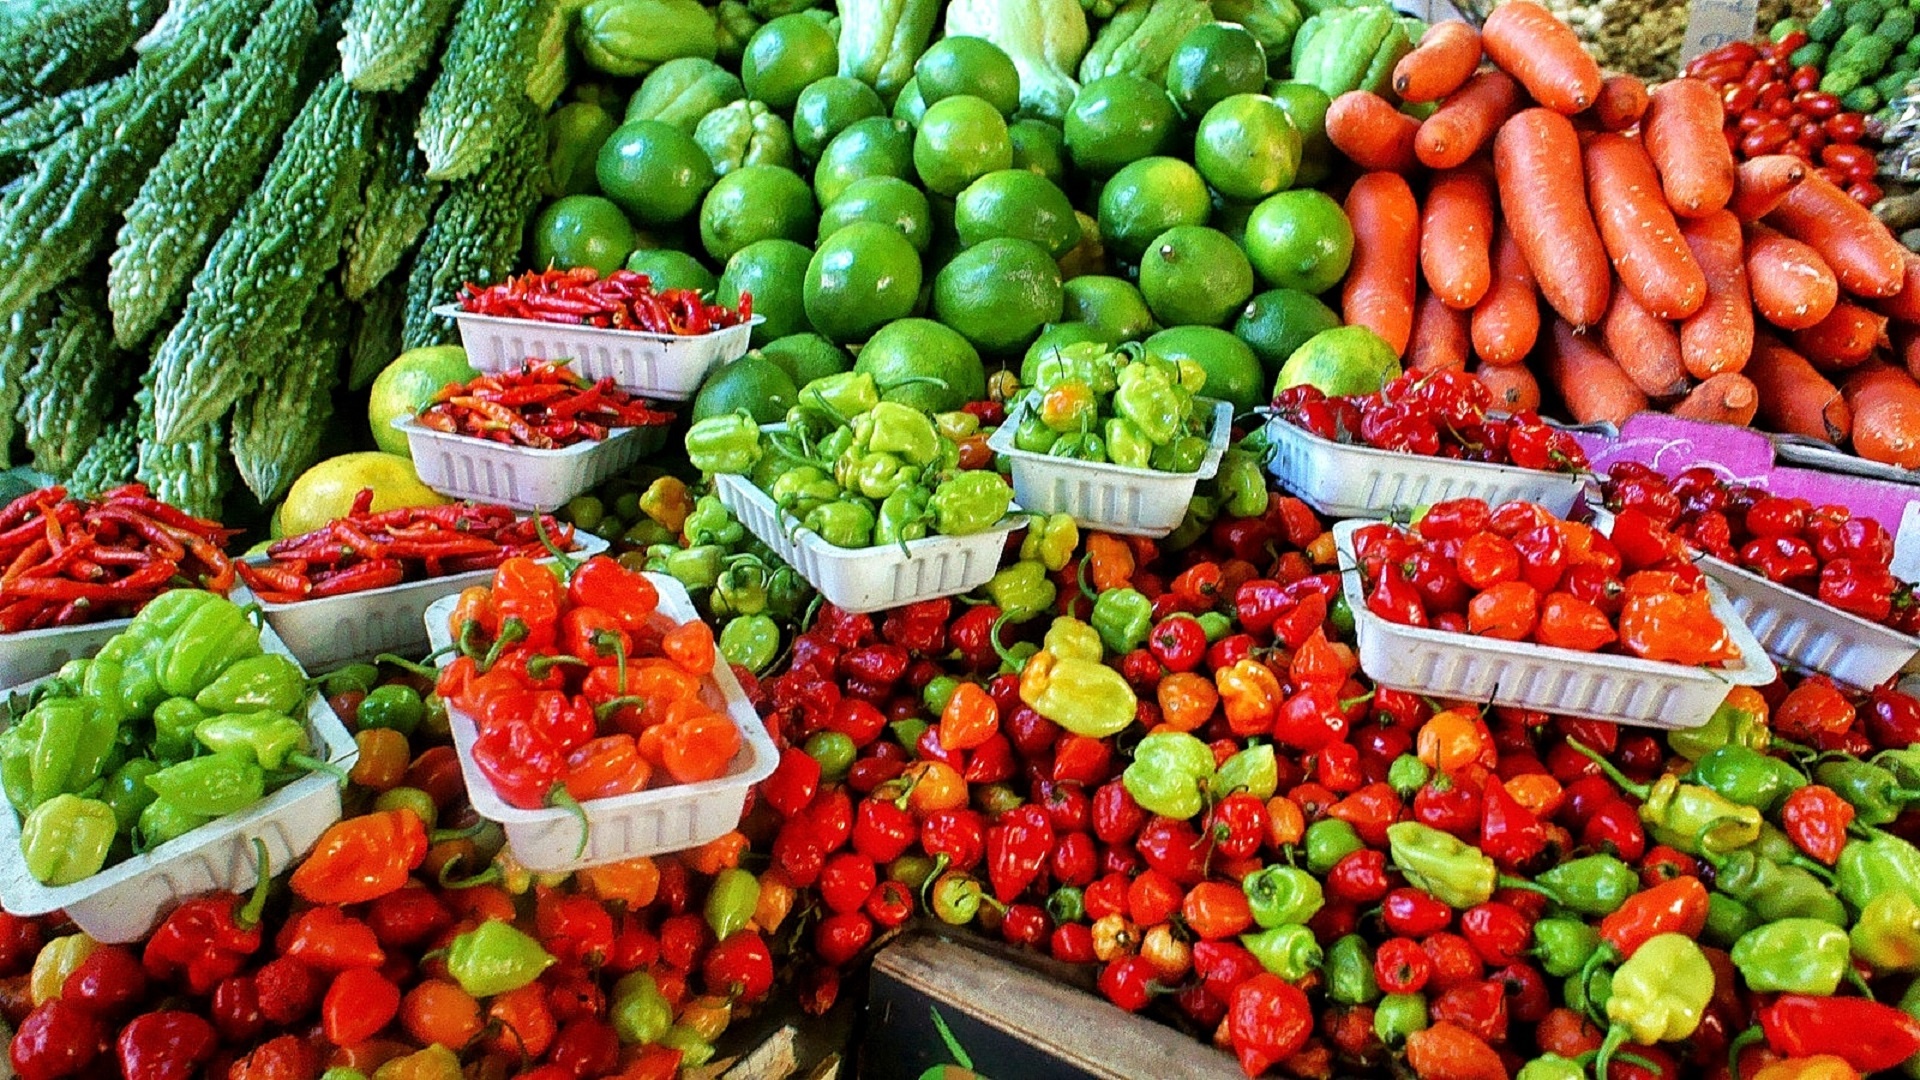 Farmers market,fresh,vegetable,ripe,various free image from